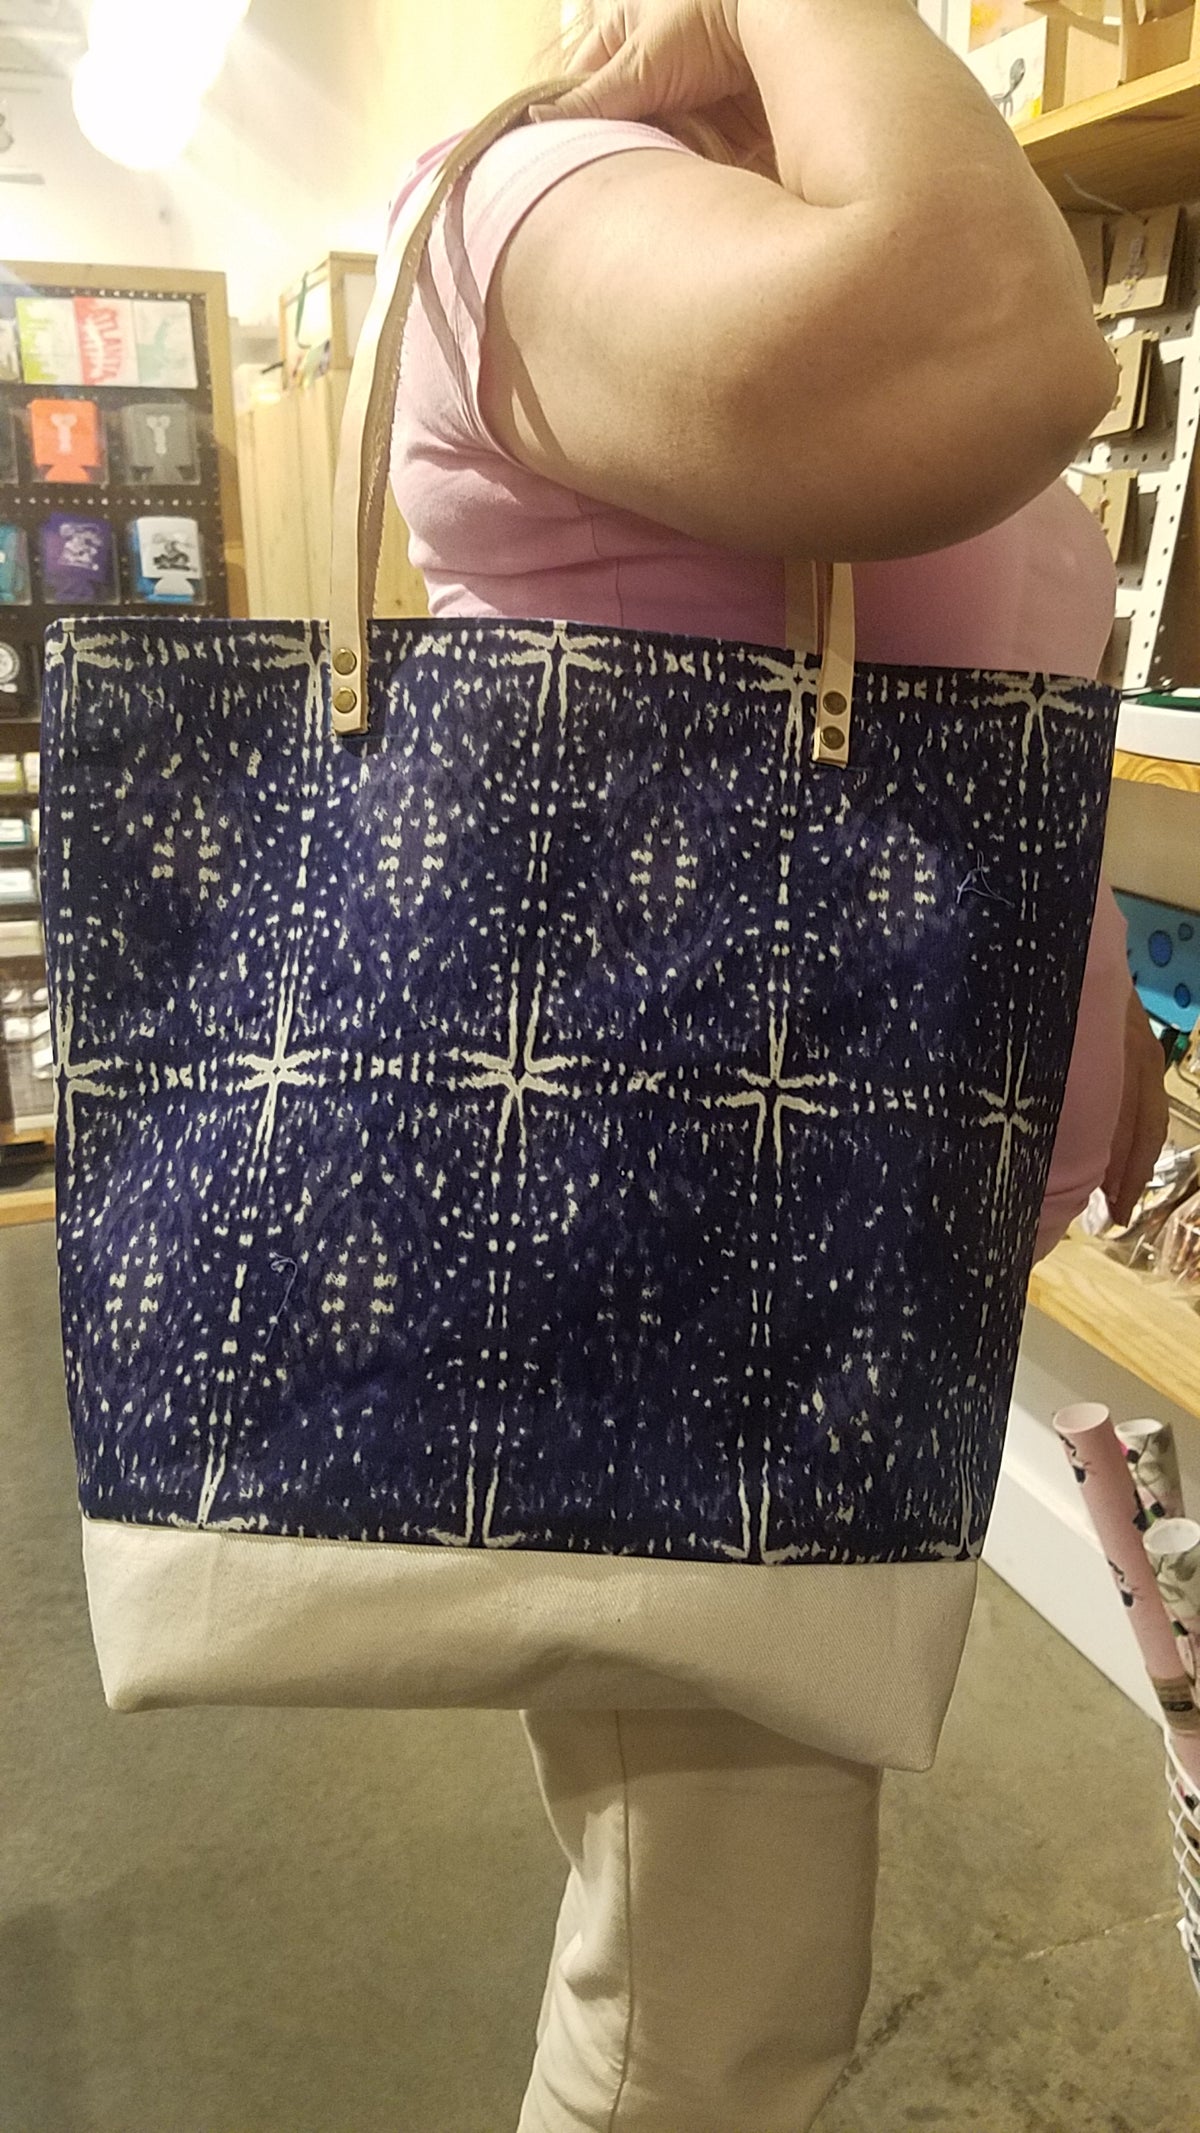 Sewing 102: Leather Handled Totes